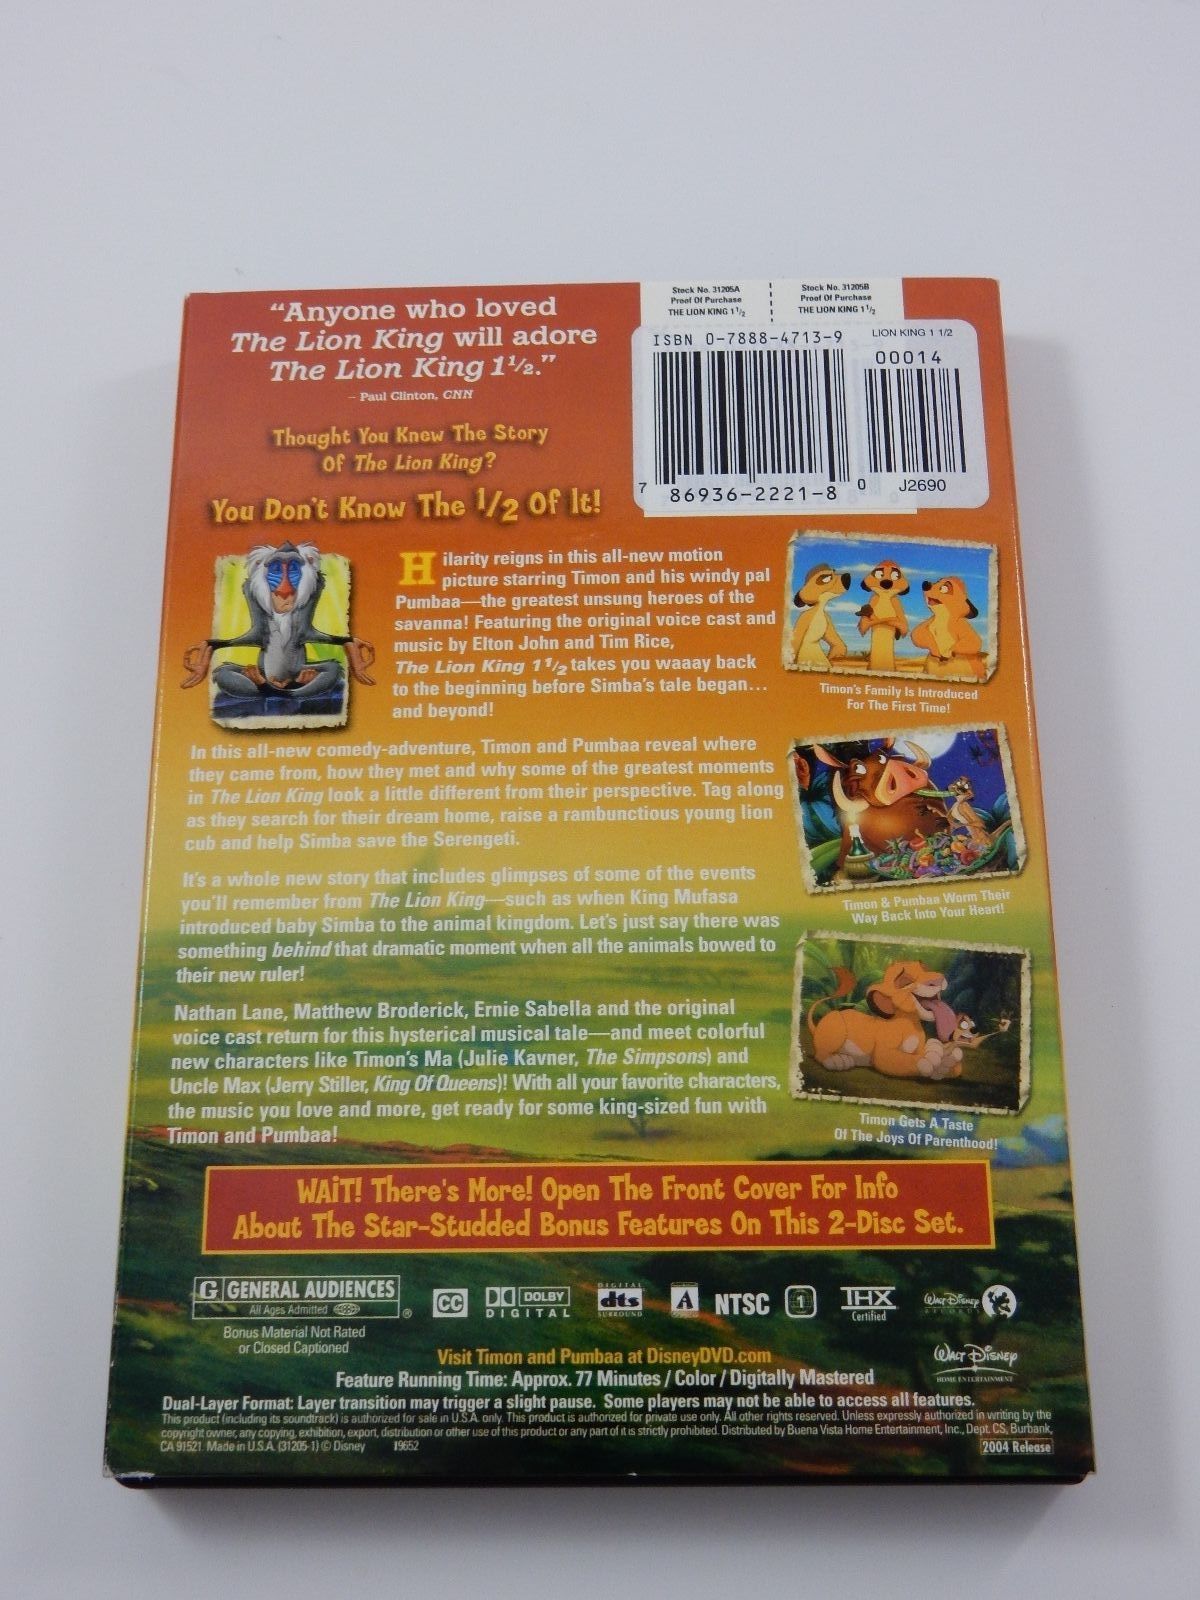 Disney The Lion King 1 1/2 (DVD, 2004, and 50 similar items